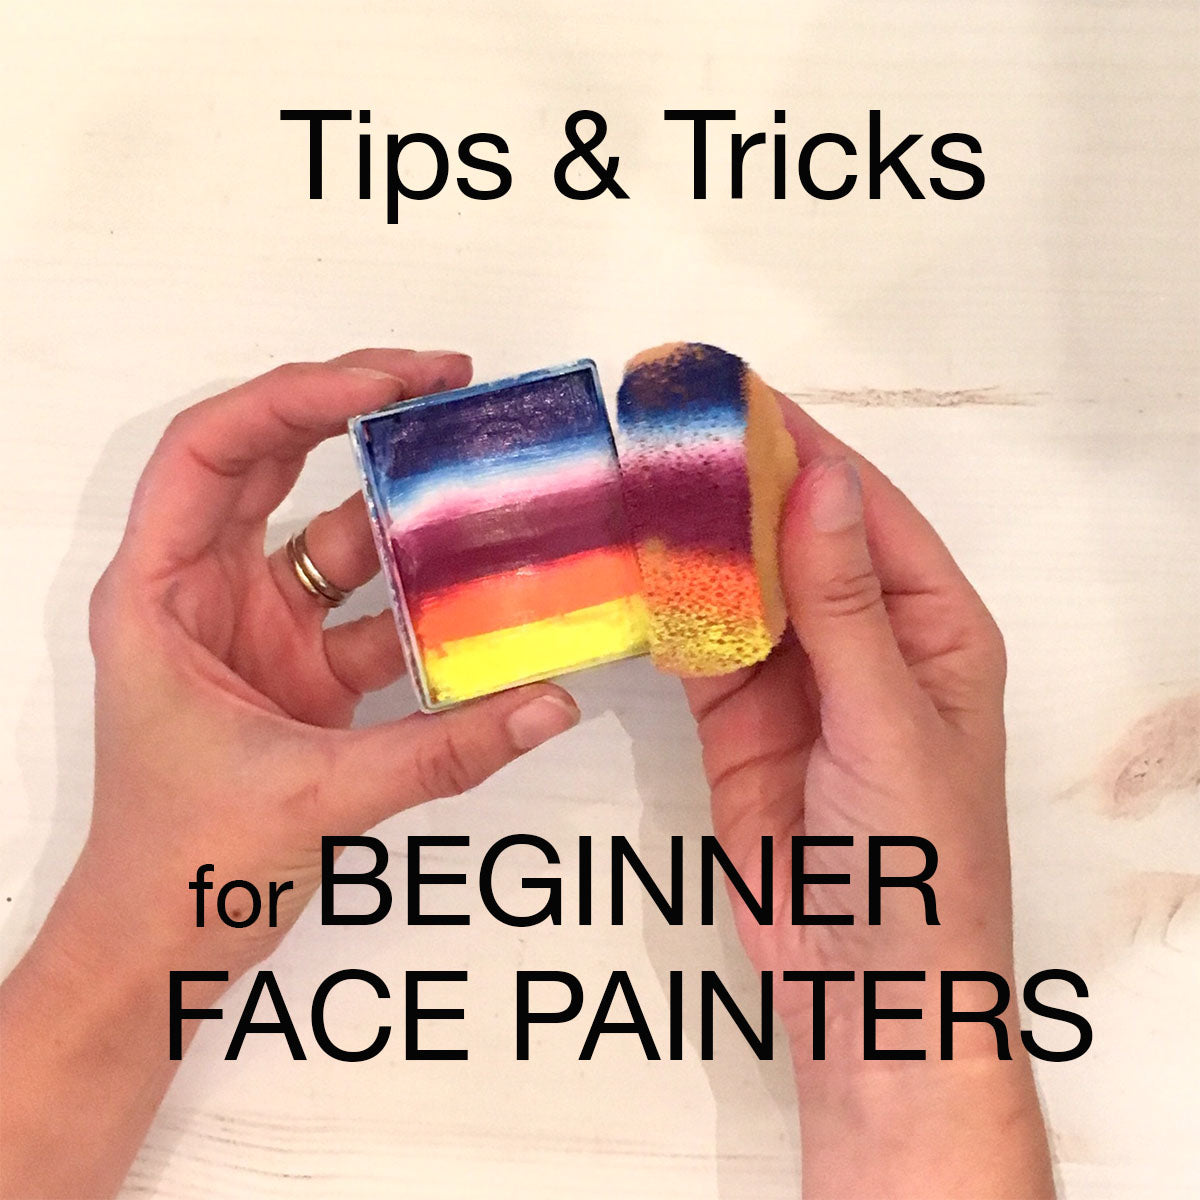 Face Paint 101: Supplies and Tips for Great Faces - Between Carpools